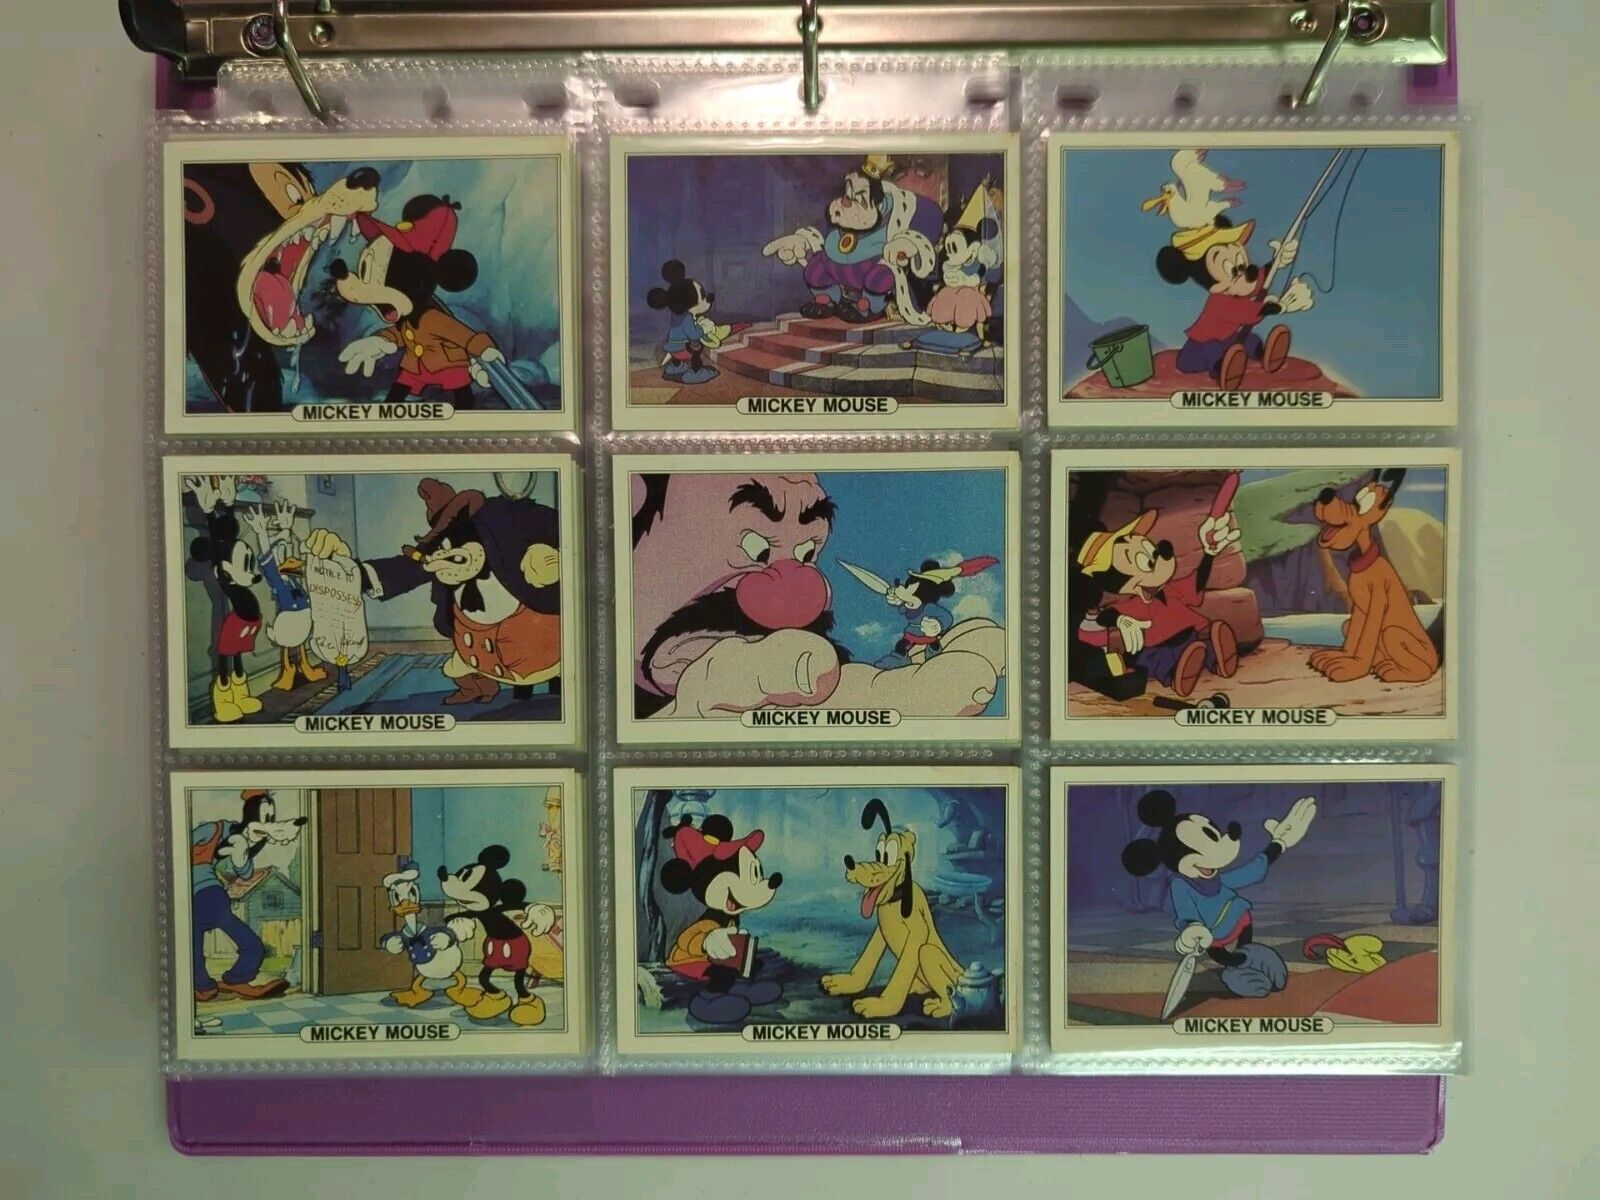 Disney Treat Hobby Complete Series A, Set #1 - #5, 90 Cards Vintage 1982 Mickey